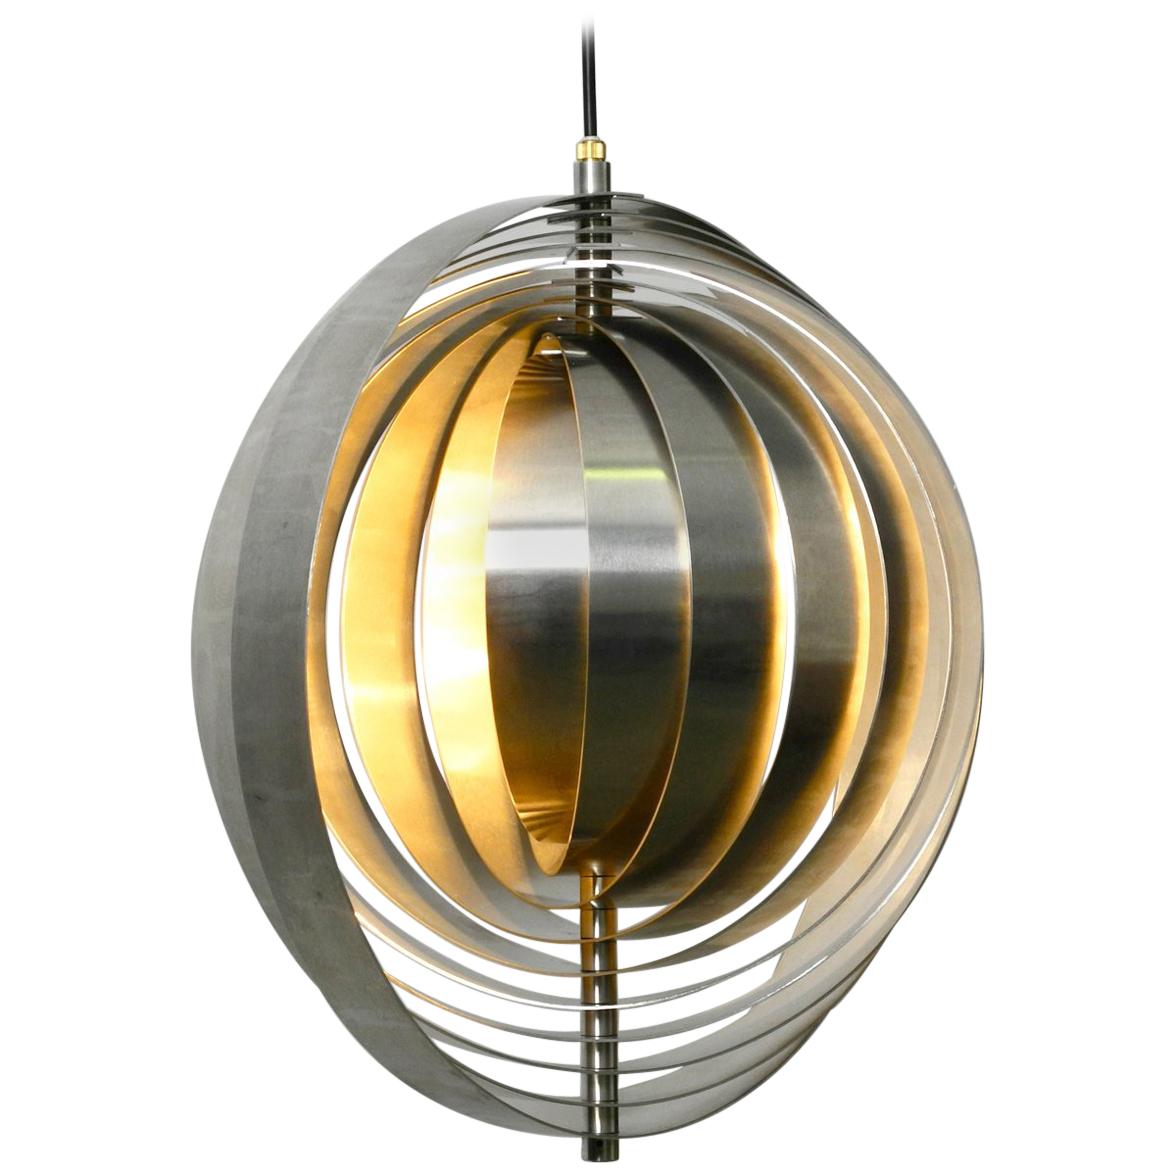 1960s Space Age Moon Lamp Made of Brushed Stainless Steel Solid Construction